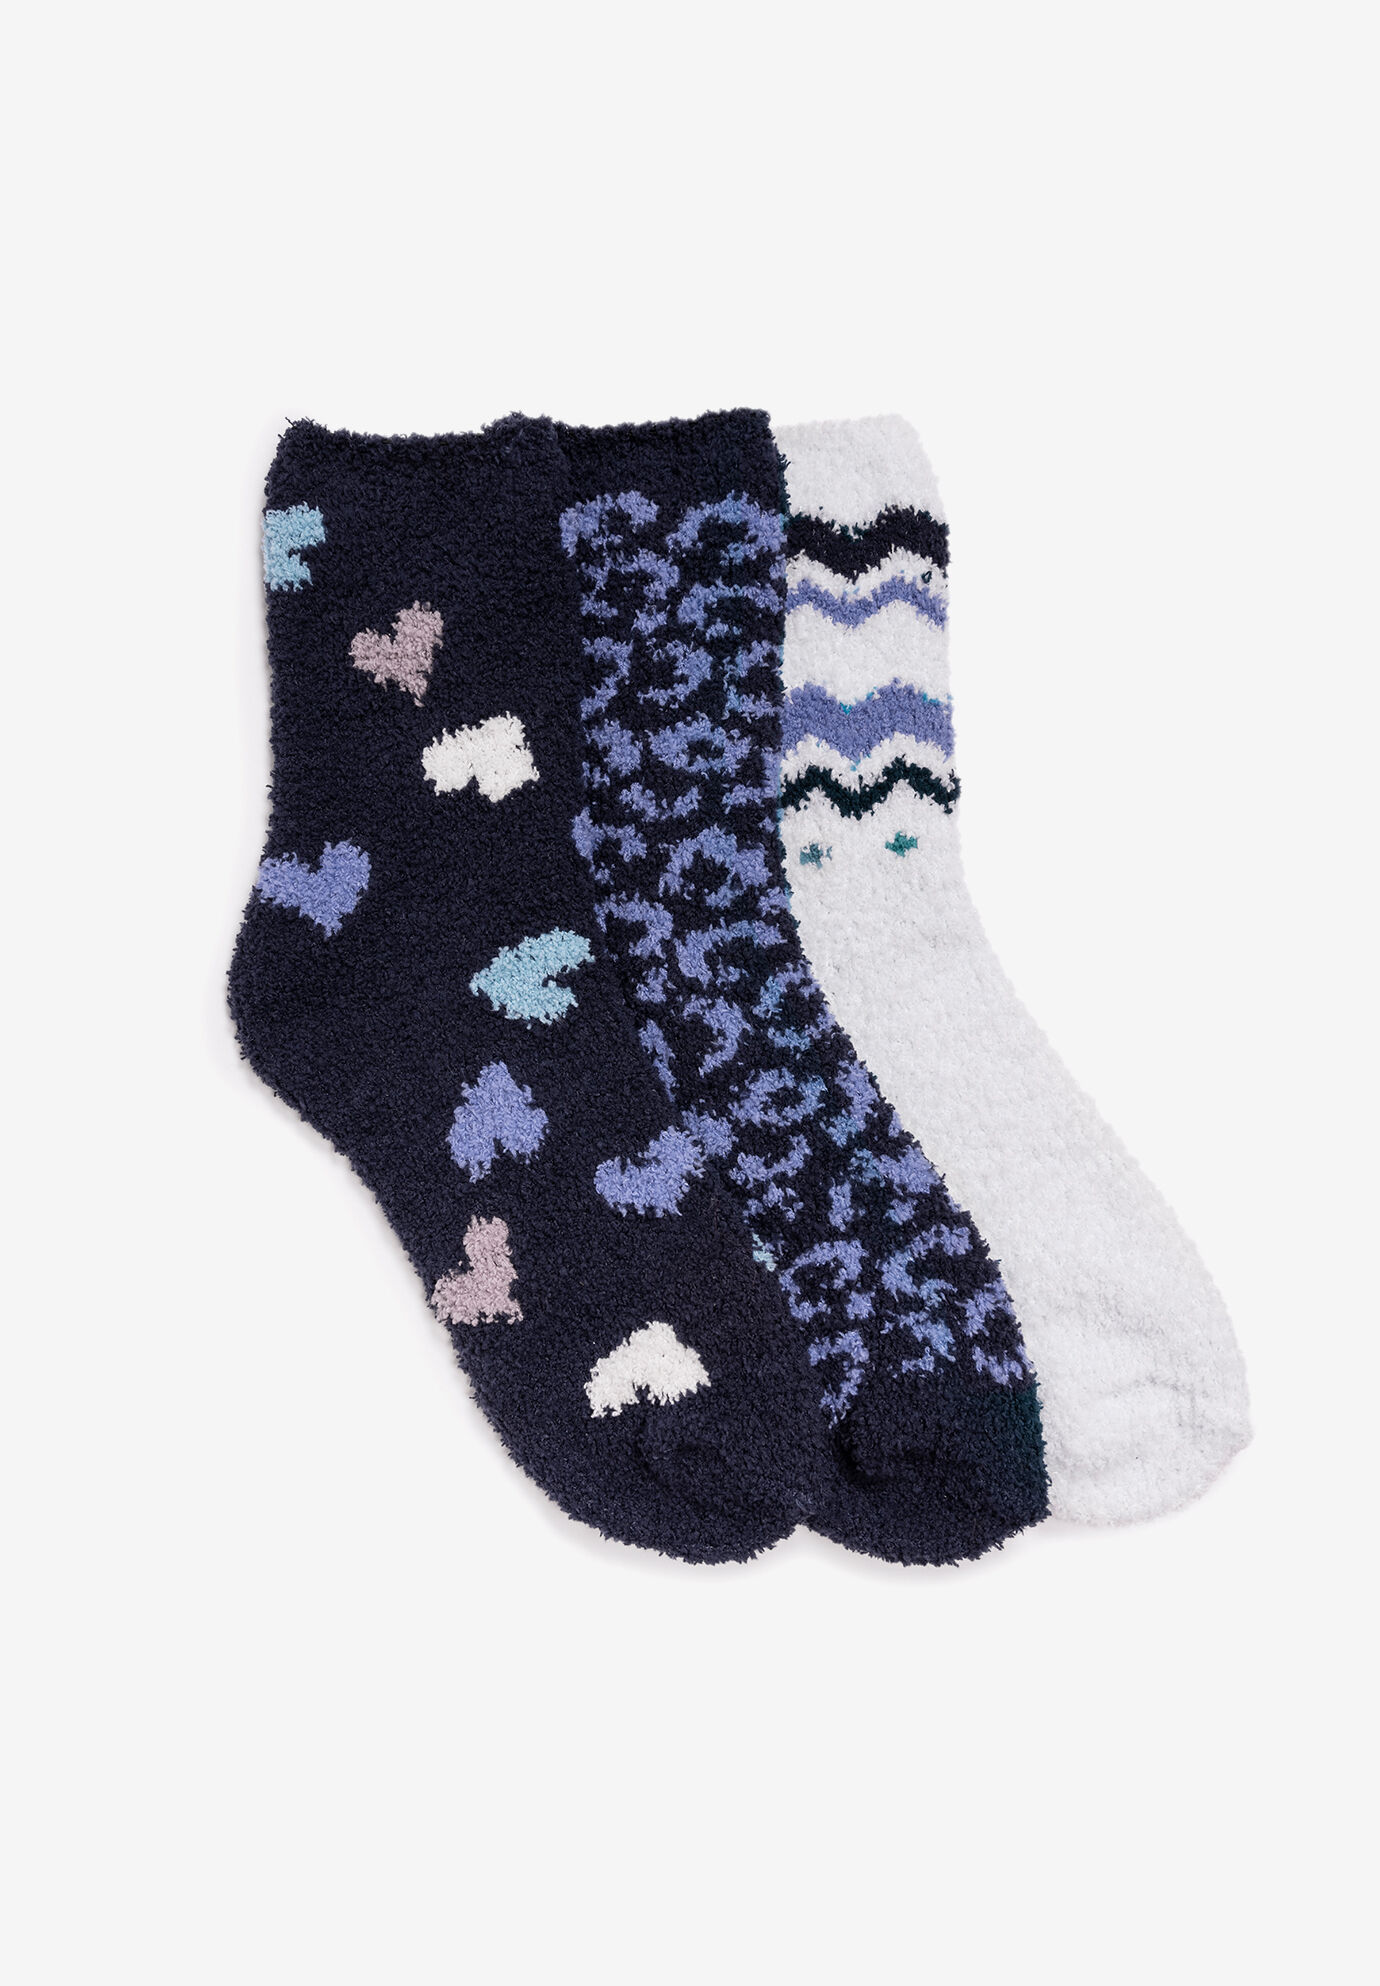 Women's 3 Pack Holiday Crew Socks by MUK LUKS in Navy (Size ONE)